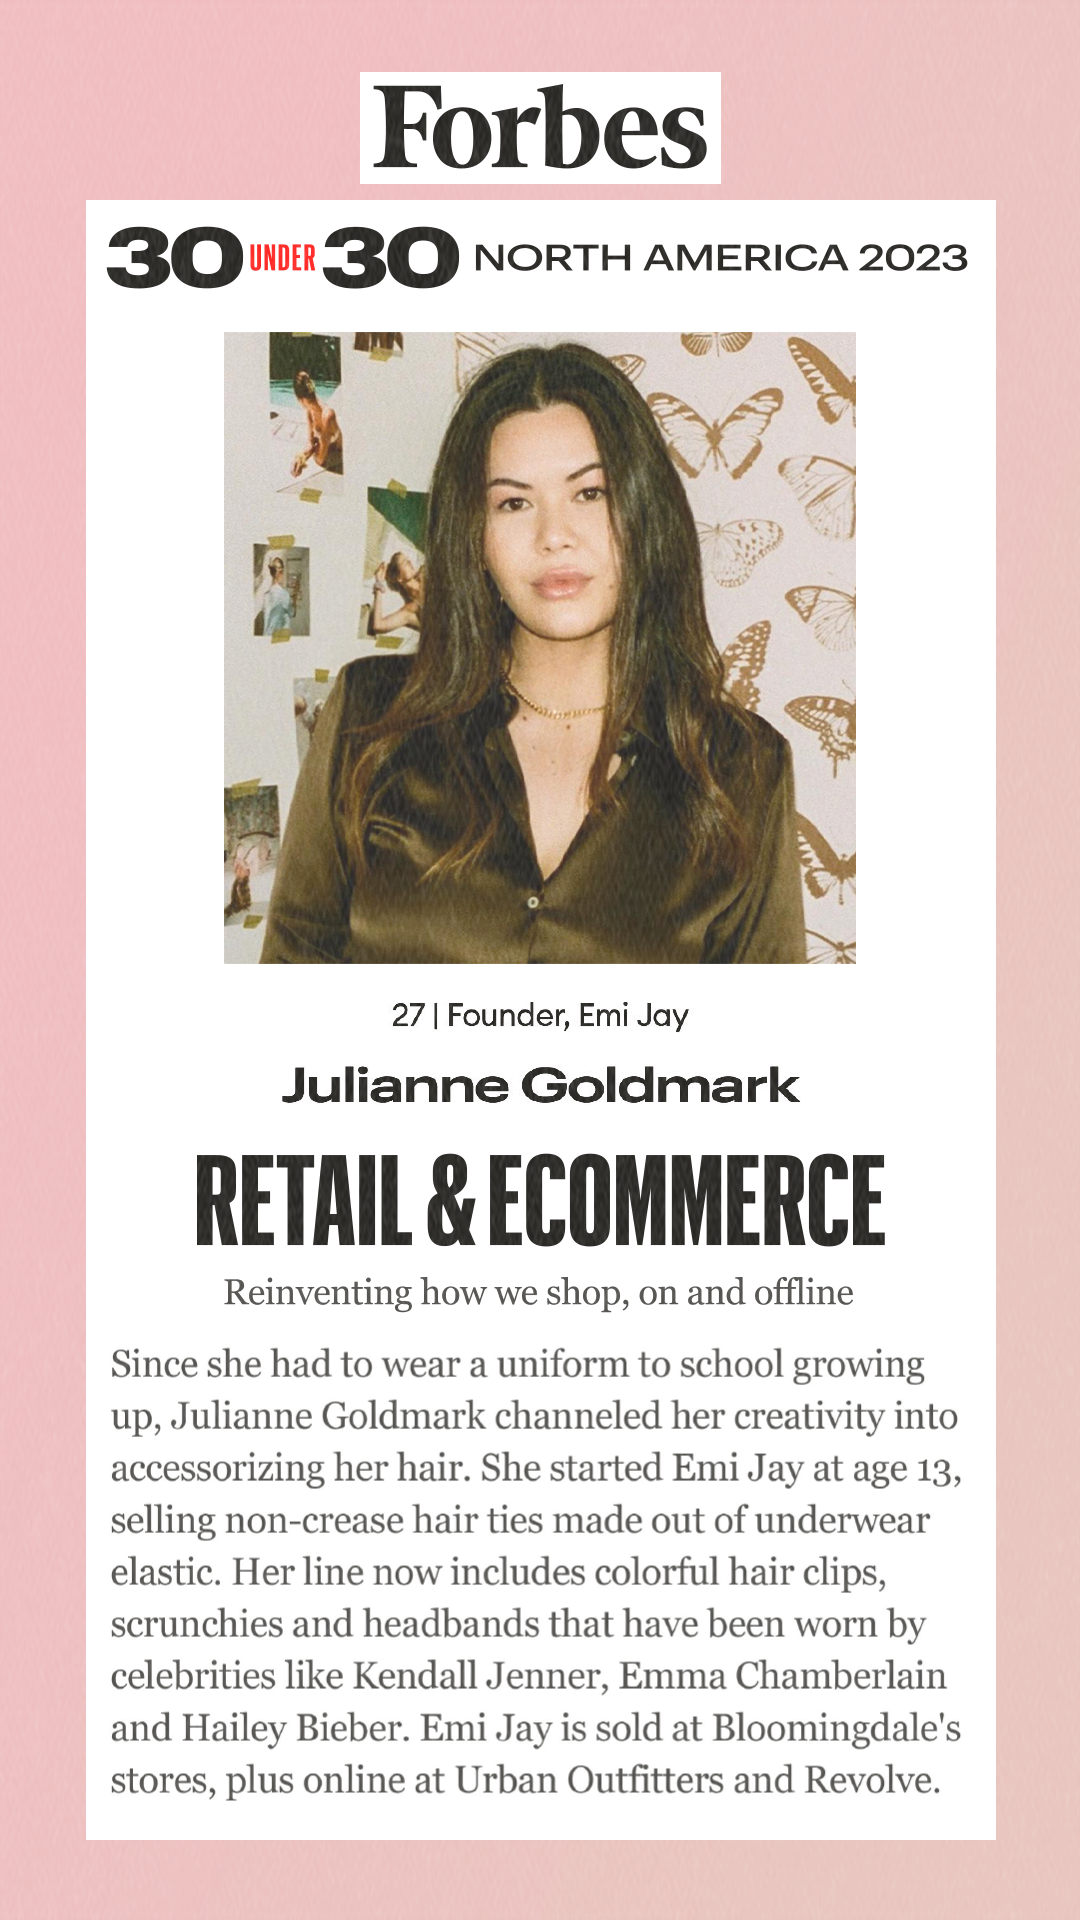 30 Under 30: Retail & Ecommerce Reinventing how we shop, on and offline Julianne Goldmark Since she had to wear a uniform to school growing up, Julianne Goldmark channeled her creativity into accessorizing her hair. She started Emi Jay at age 13, selling non-crease hair ties made out of underwear elastic. Her line now includes colorful hair clips, scrunchies and headbands that have been worn by celebrities like Kendall Jenner, Emma Chamberlain and Hailey Bieber. Emi Jay is sold at Bloomingdale's stores, plus online at Urban Outfitters and Revolve.